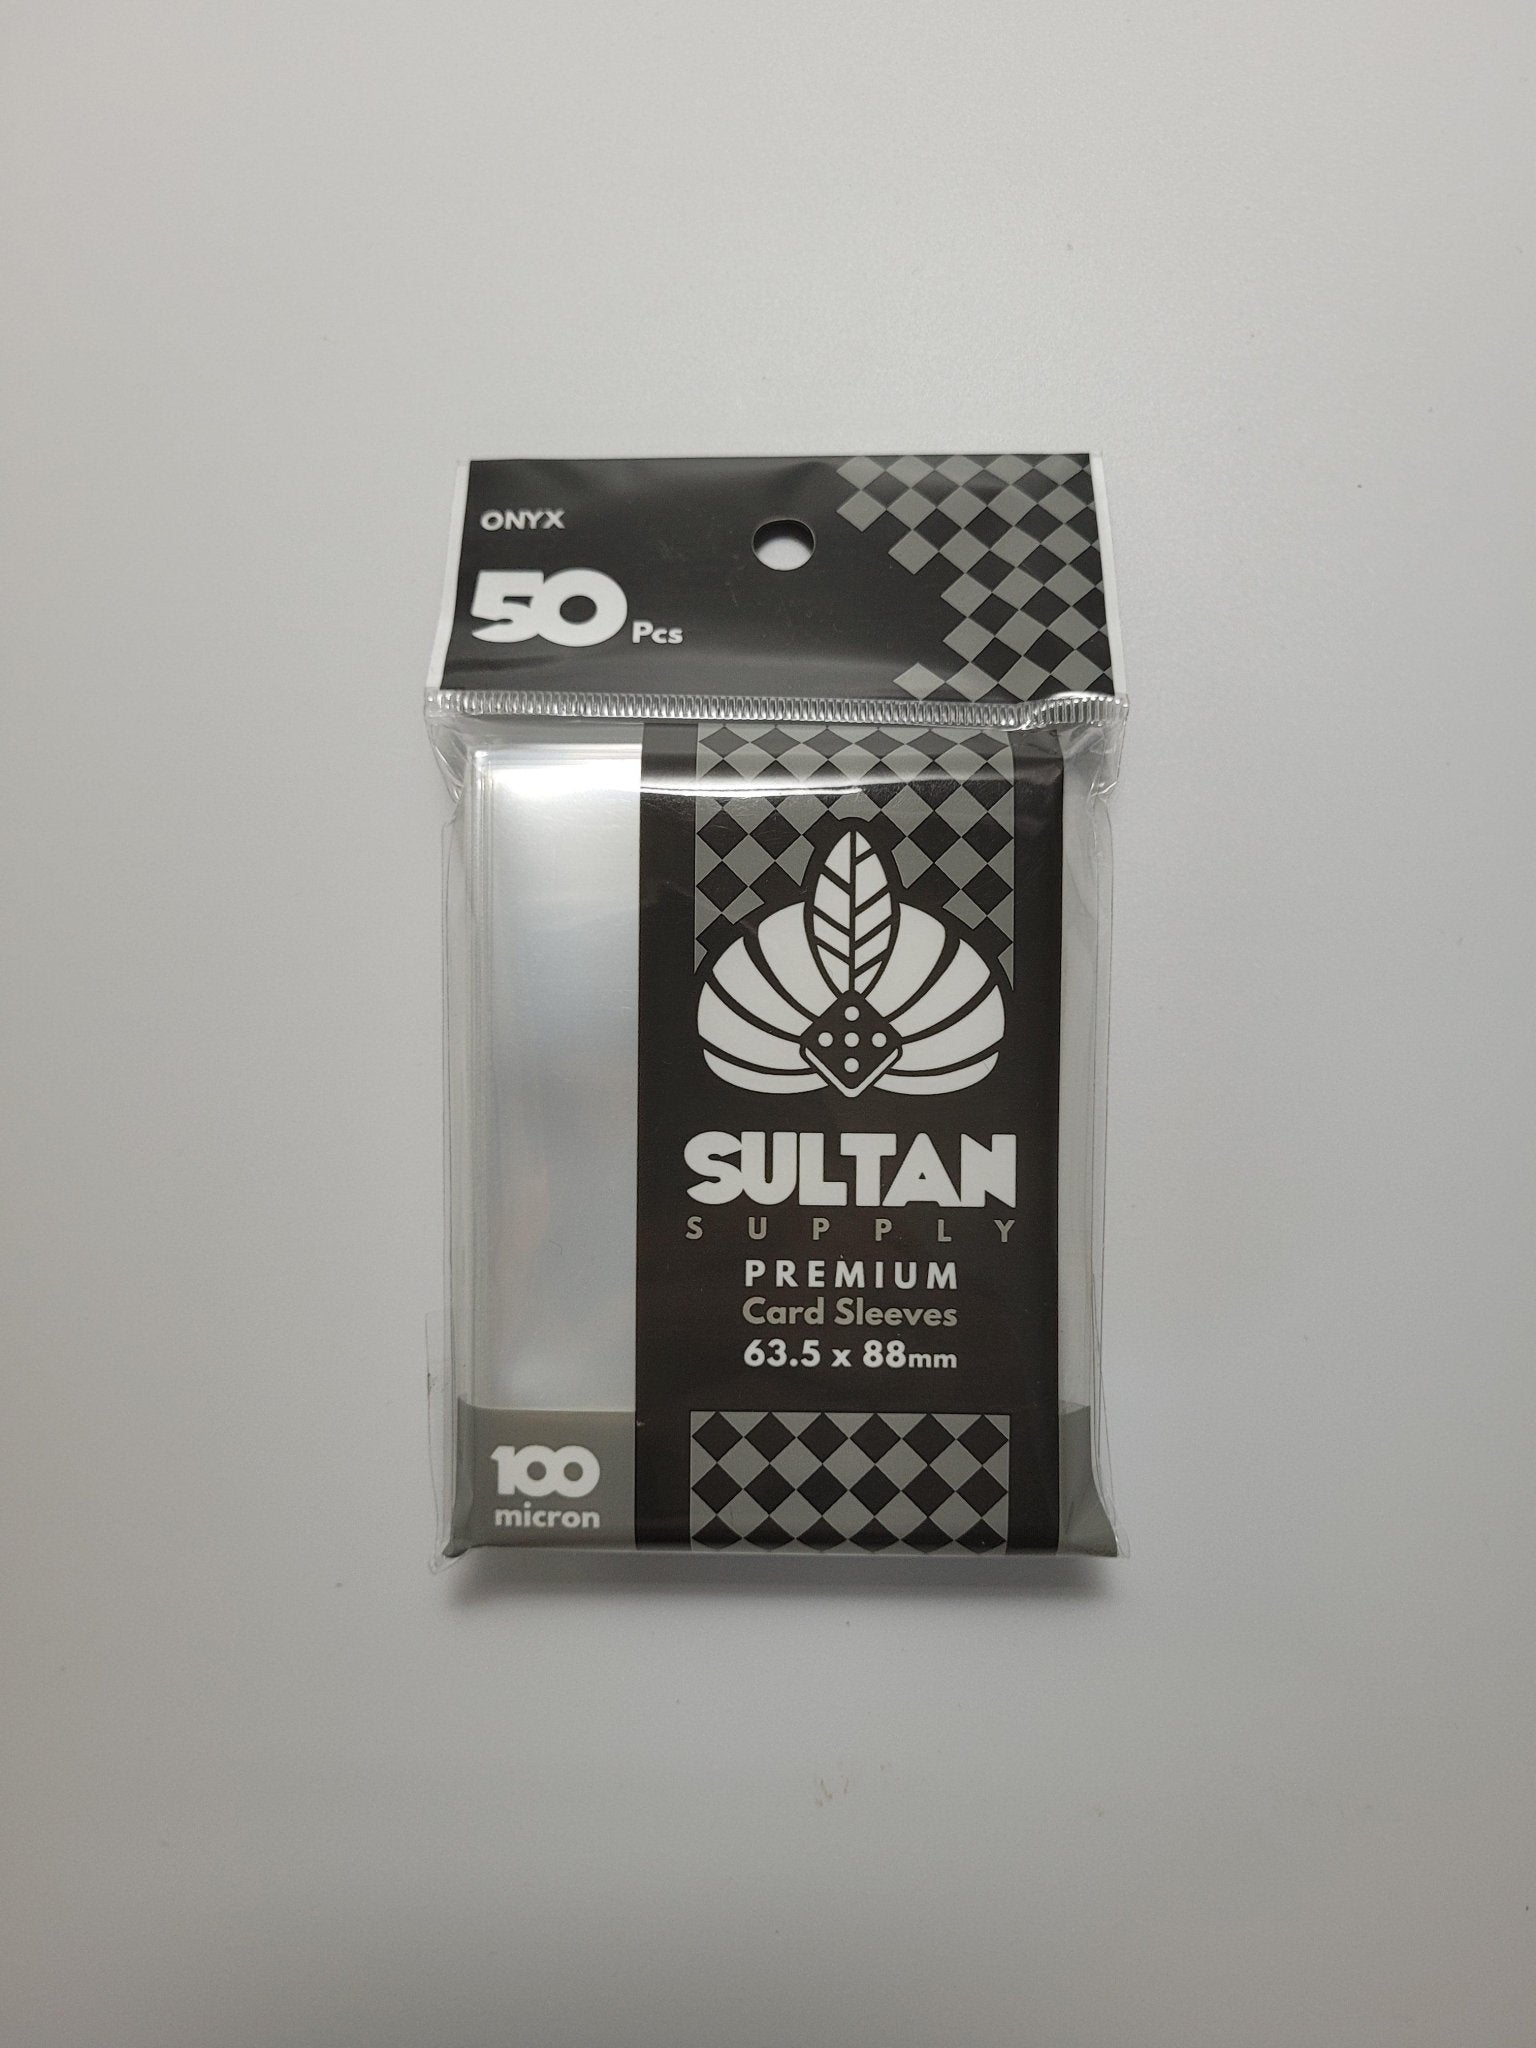 Sultan Supply Premium Card Sleeves: 63.5 x 88 mm Standard Onyx (100 microns) - Gaming Library